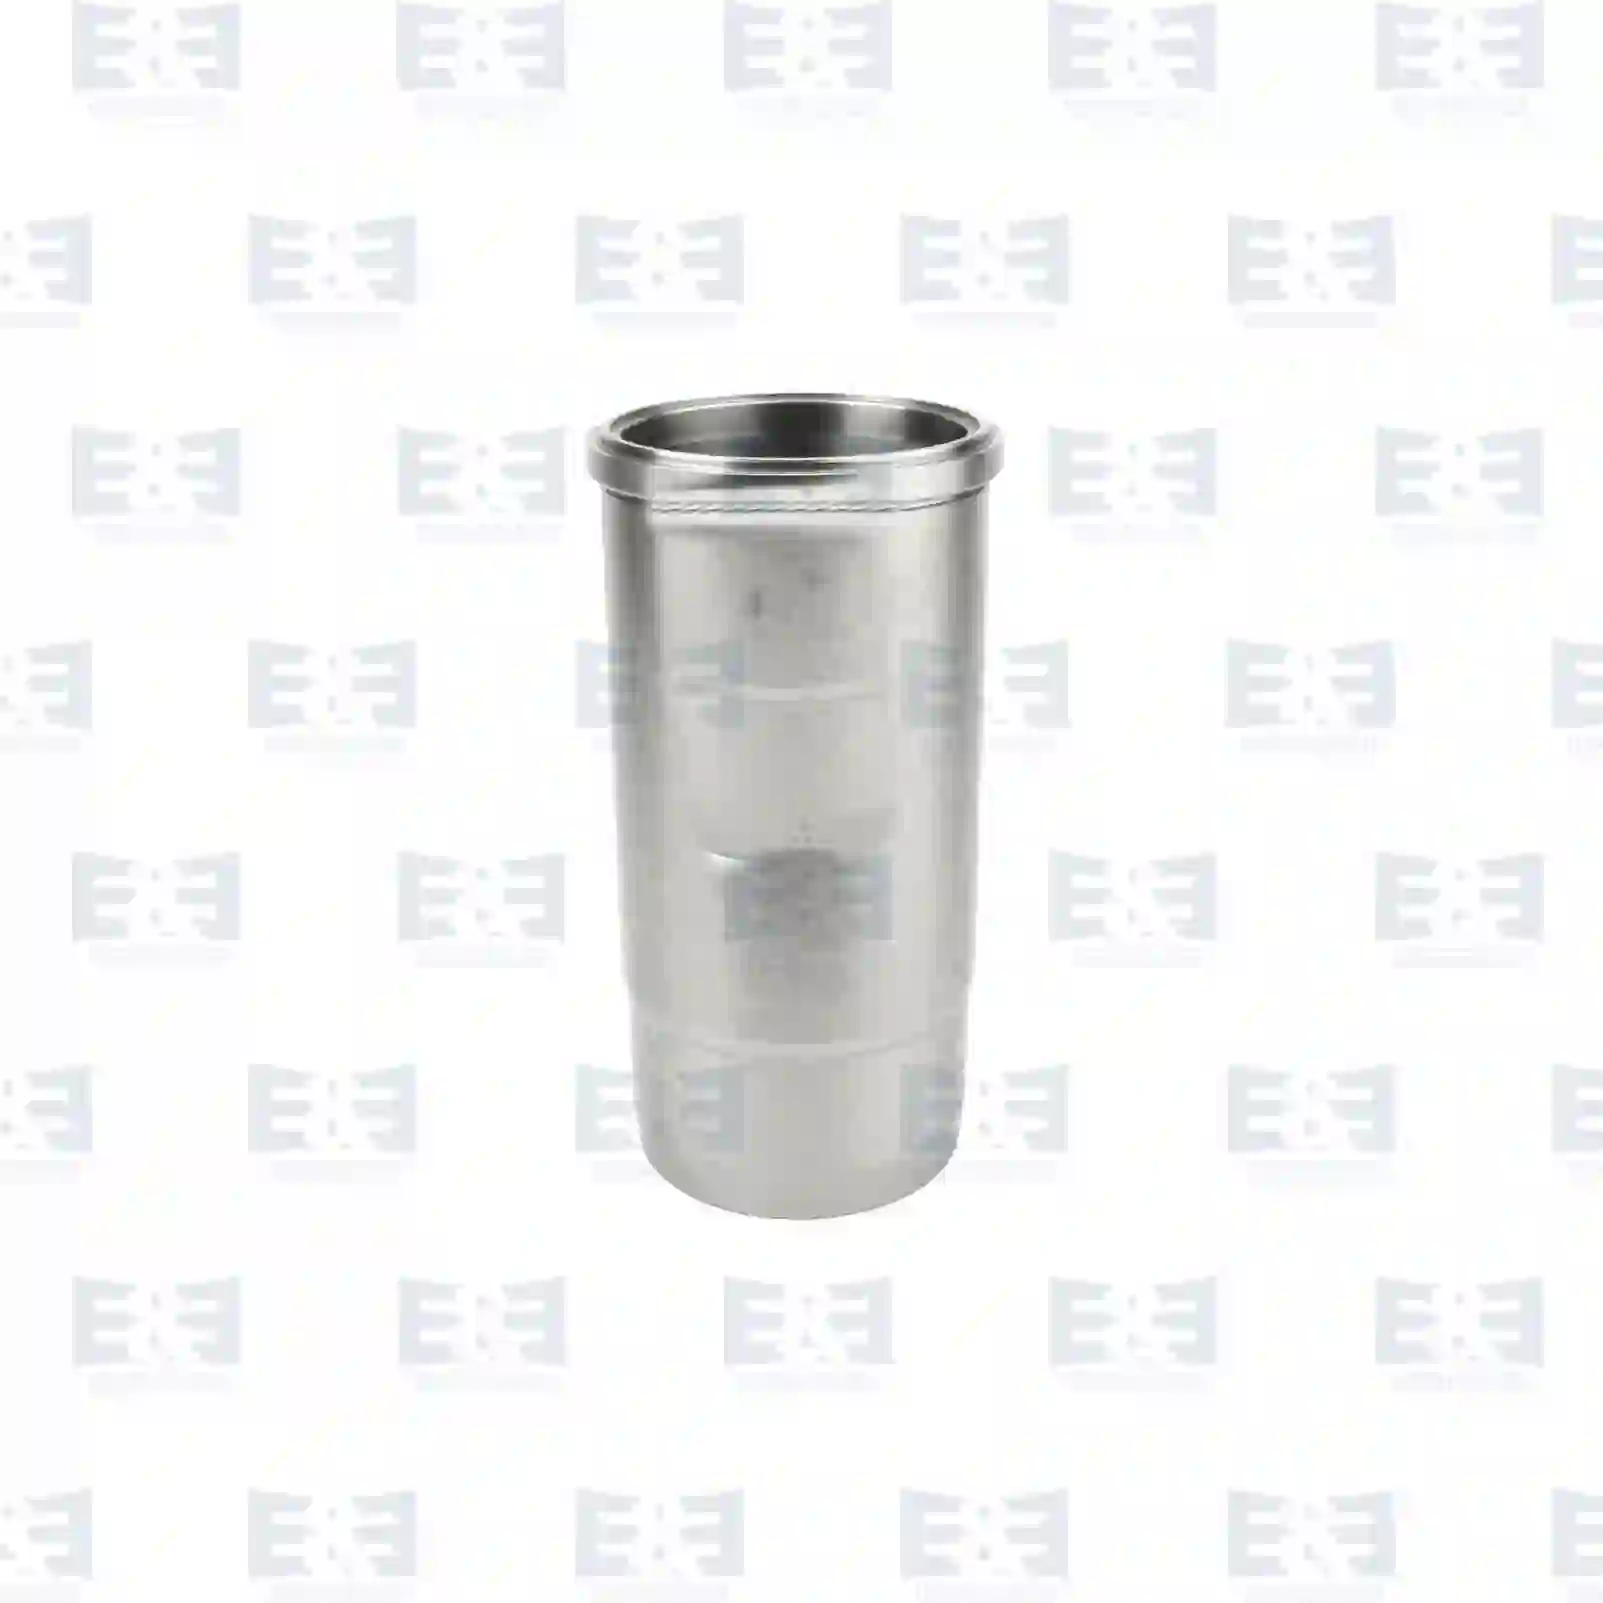 Cylinder liner, without seal rings, 2E2208738, 479380, , , ||  2E2208738 E&E Truck Spare Parts | Truck Spare Parts, Auotomotive Spare Parts Cylinder liner, without seal rings, 2E2208738, 479380, , , ||  2E2208738 E&E Truck Spare Parts | Truck Spare Parts, Auotomotive Spare Parts